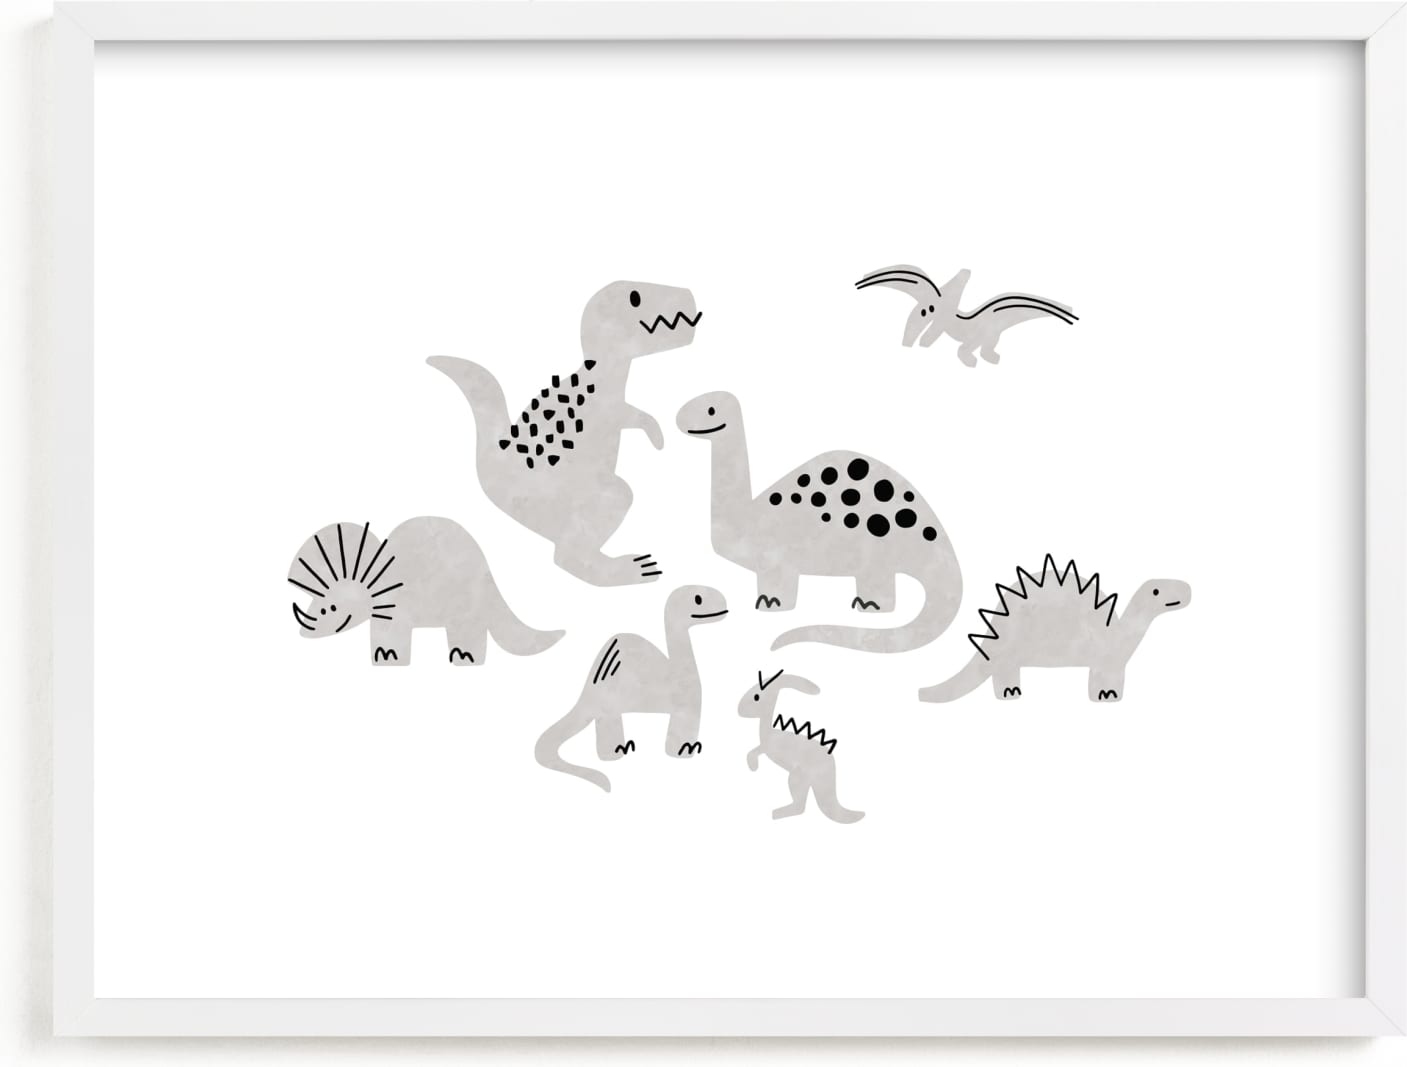 This is a black and white kids wall art by Jessie Steury called Darling Dinos.